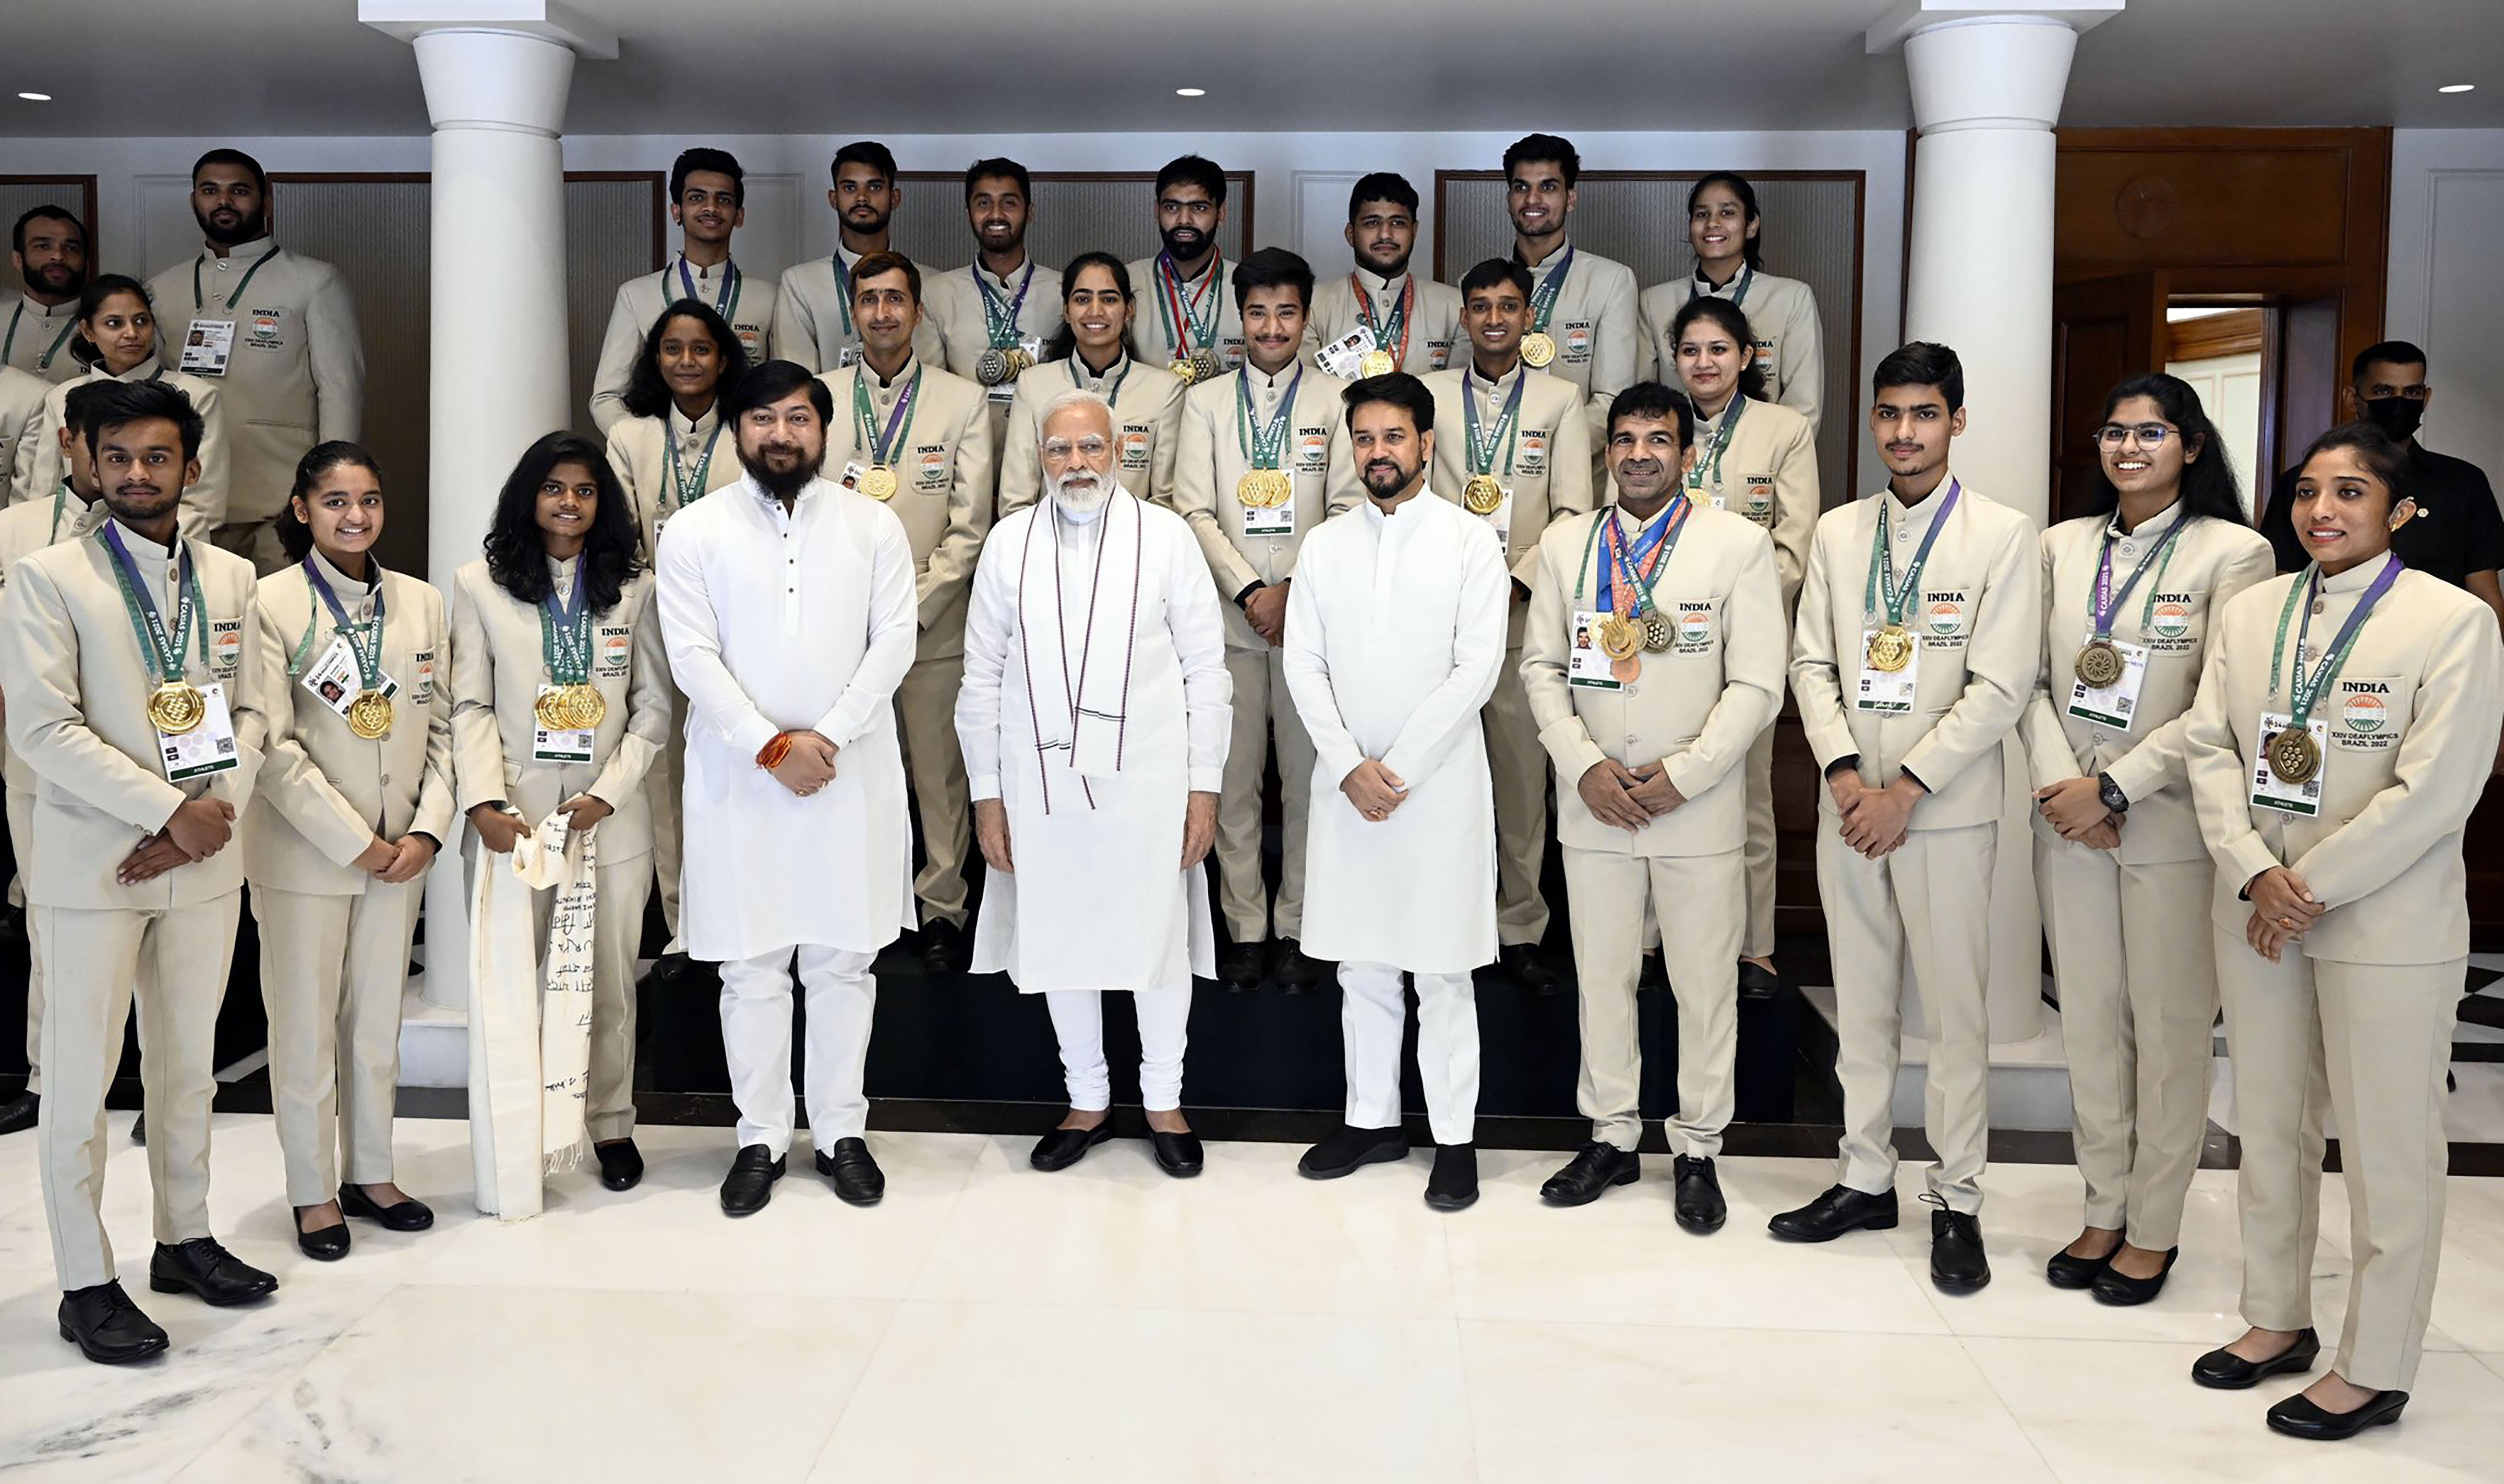 Narendra Modi hosts Deaflympics contingent, says ‘you brought pride and glory for India’